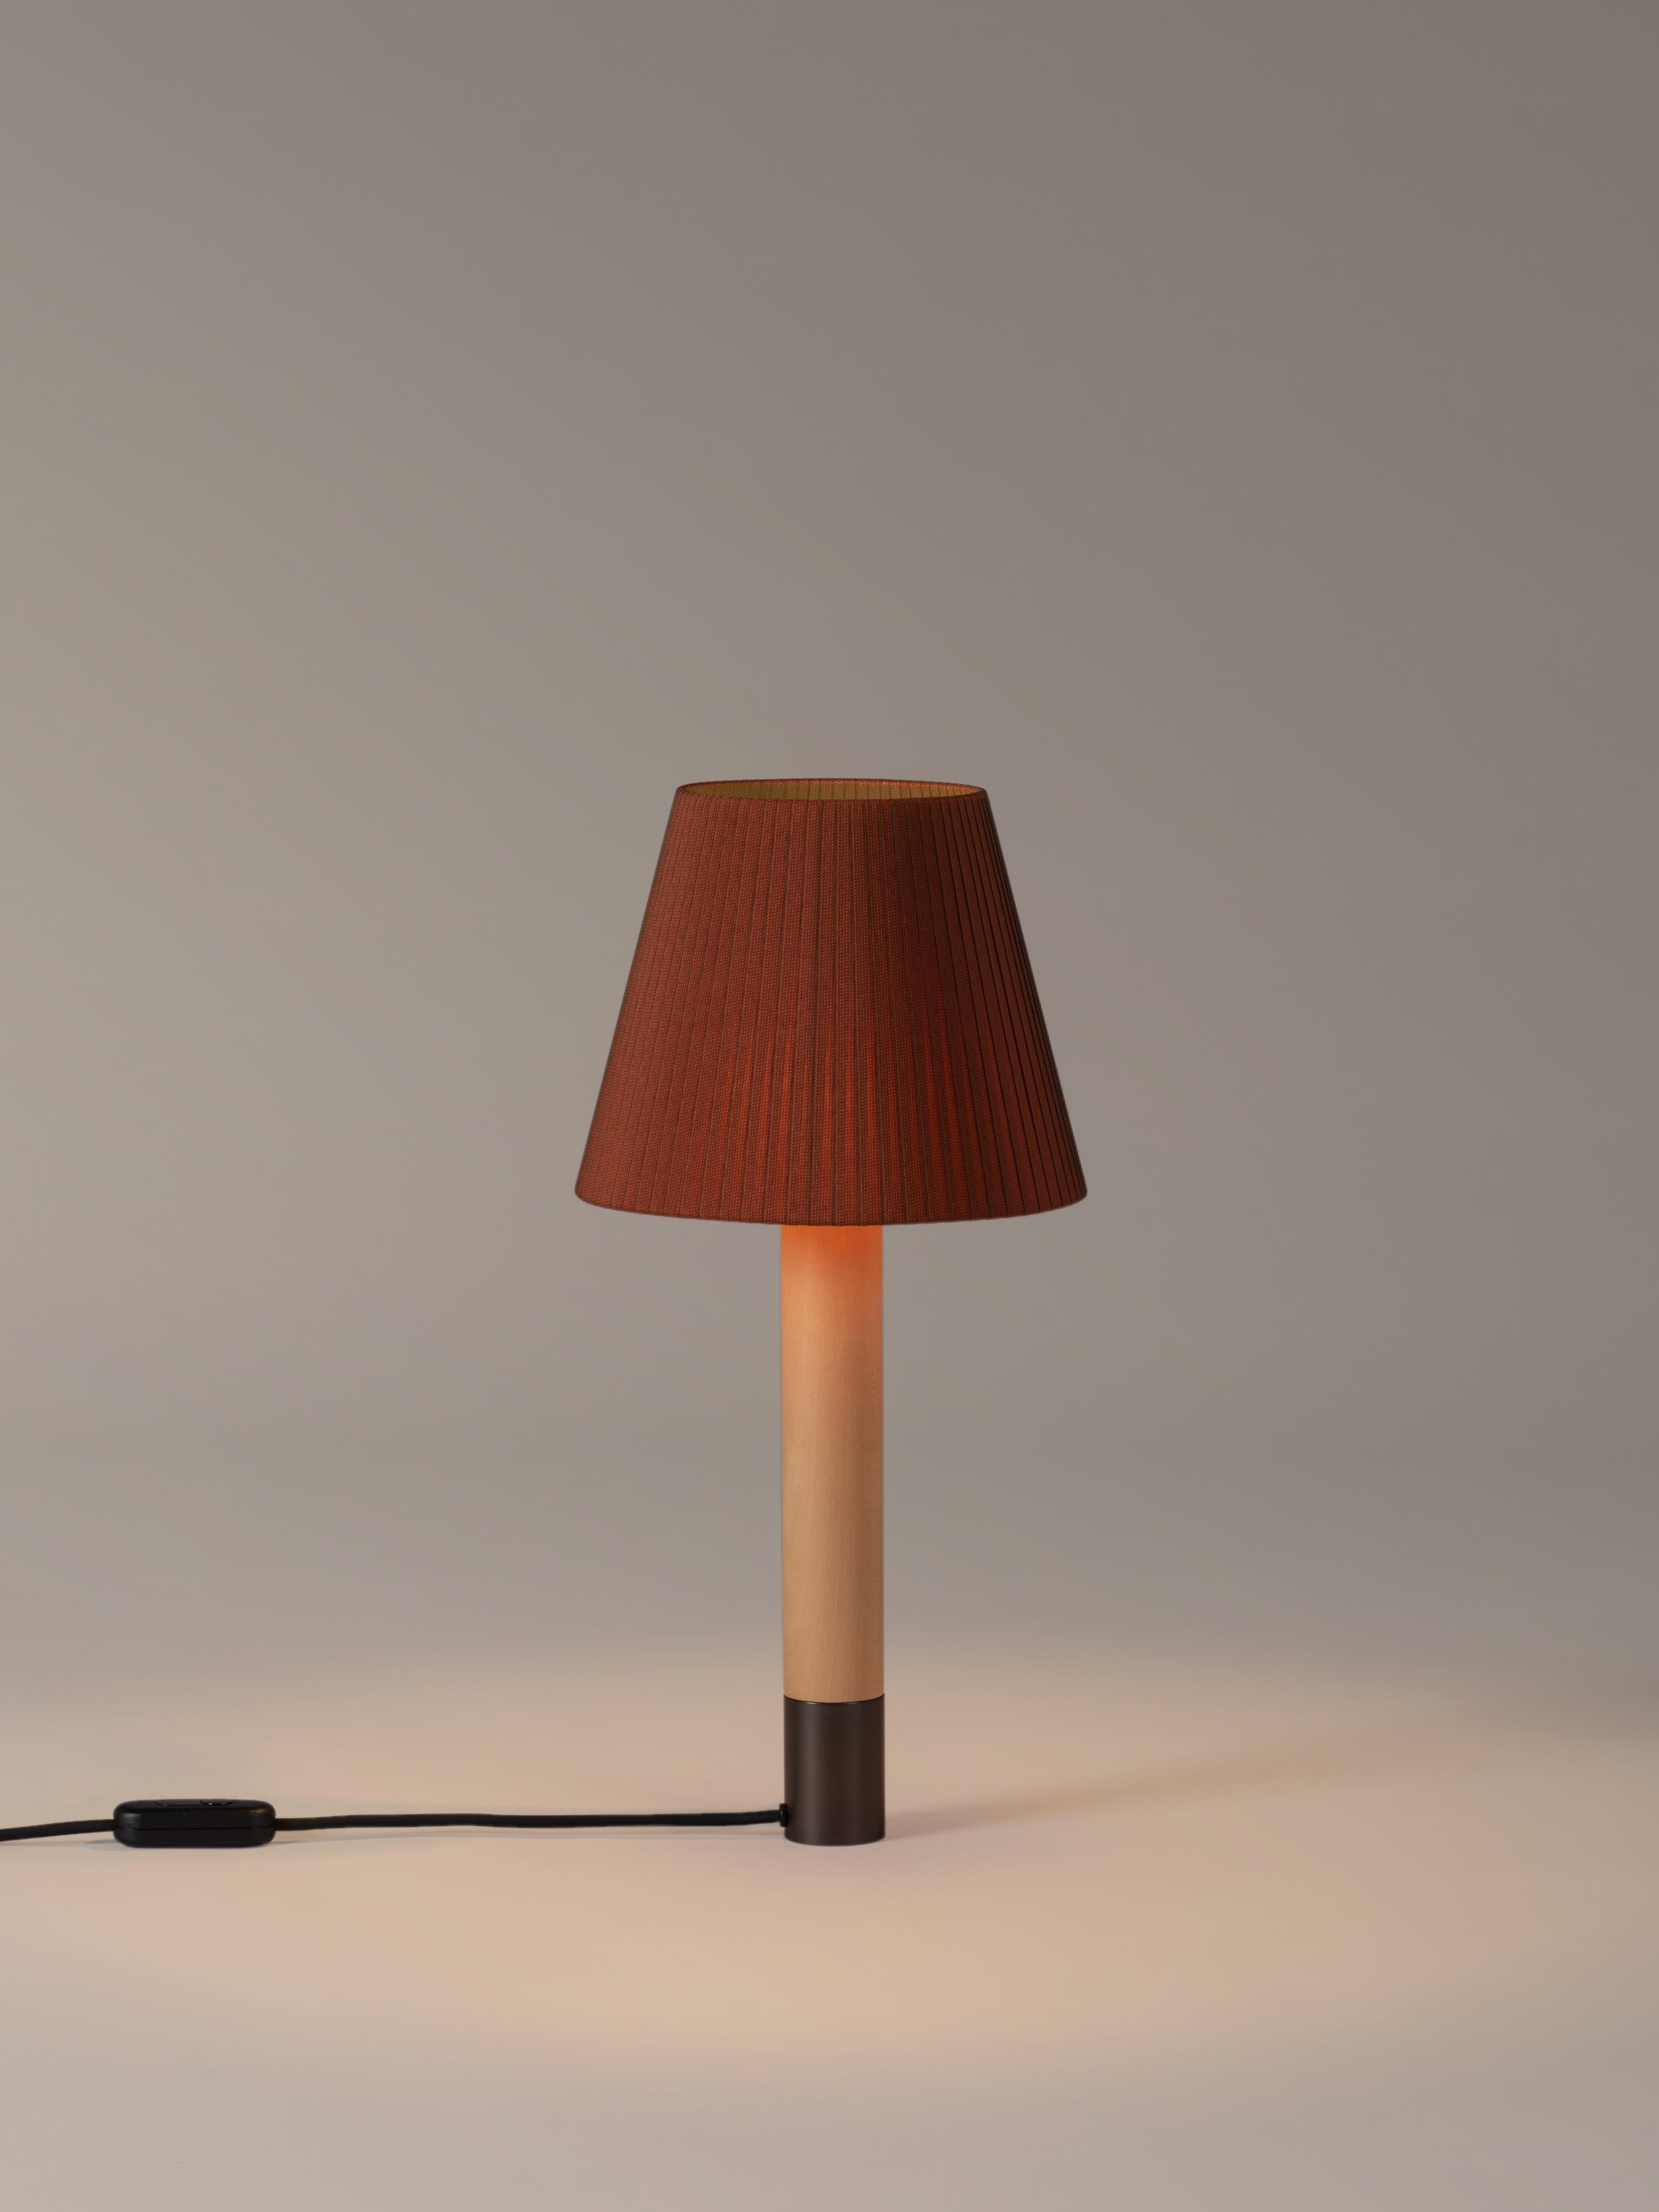 Bronze and Terracotta Básica M1 table lamp by Santiago Roqueta, Santa & Cole
Dimensions: D 25 x H 52 cm
Materials: Bronze, birch wood, ribbon.
Available in other shade colors and with or without the stabilizing disc.
Available in nickel or